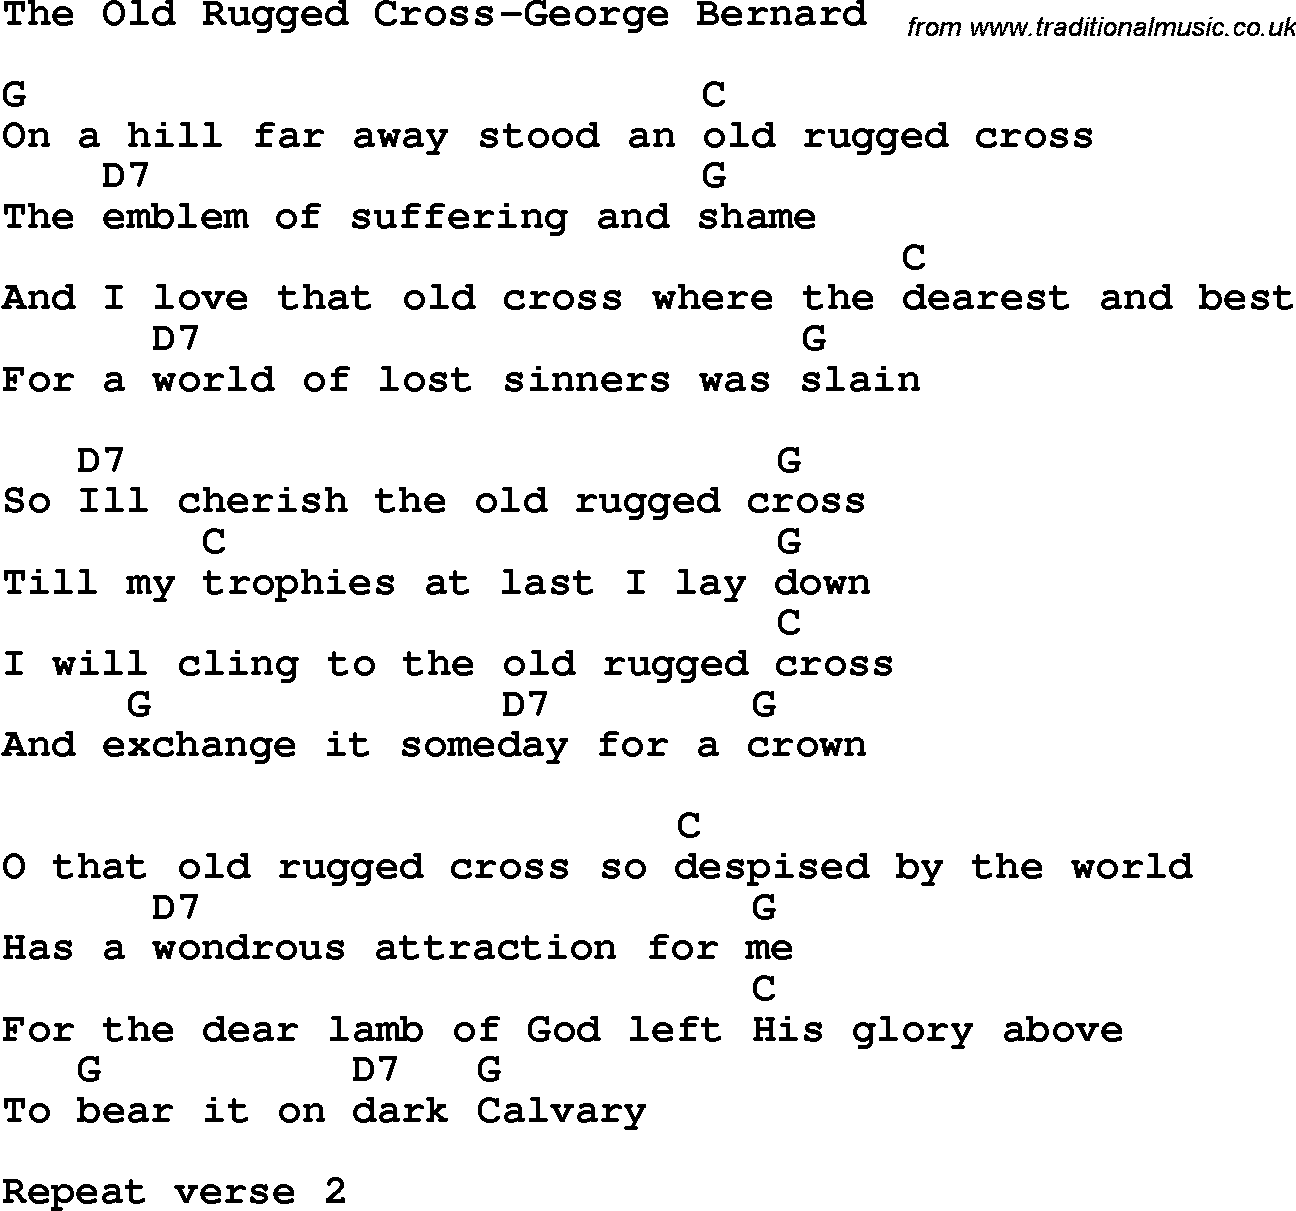 Country, Southern and Bluegrass Gospel Song The Old Rugged Cross-George Bernard lyrics and chords